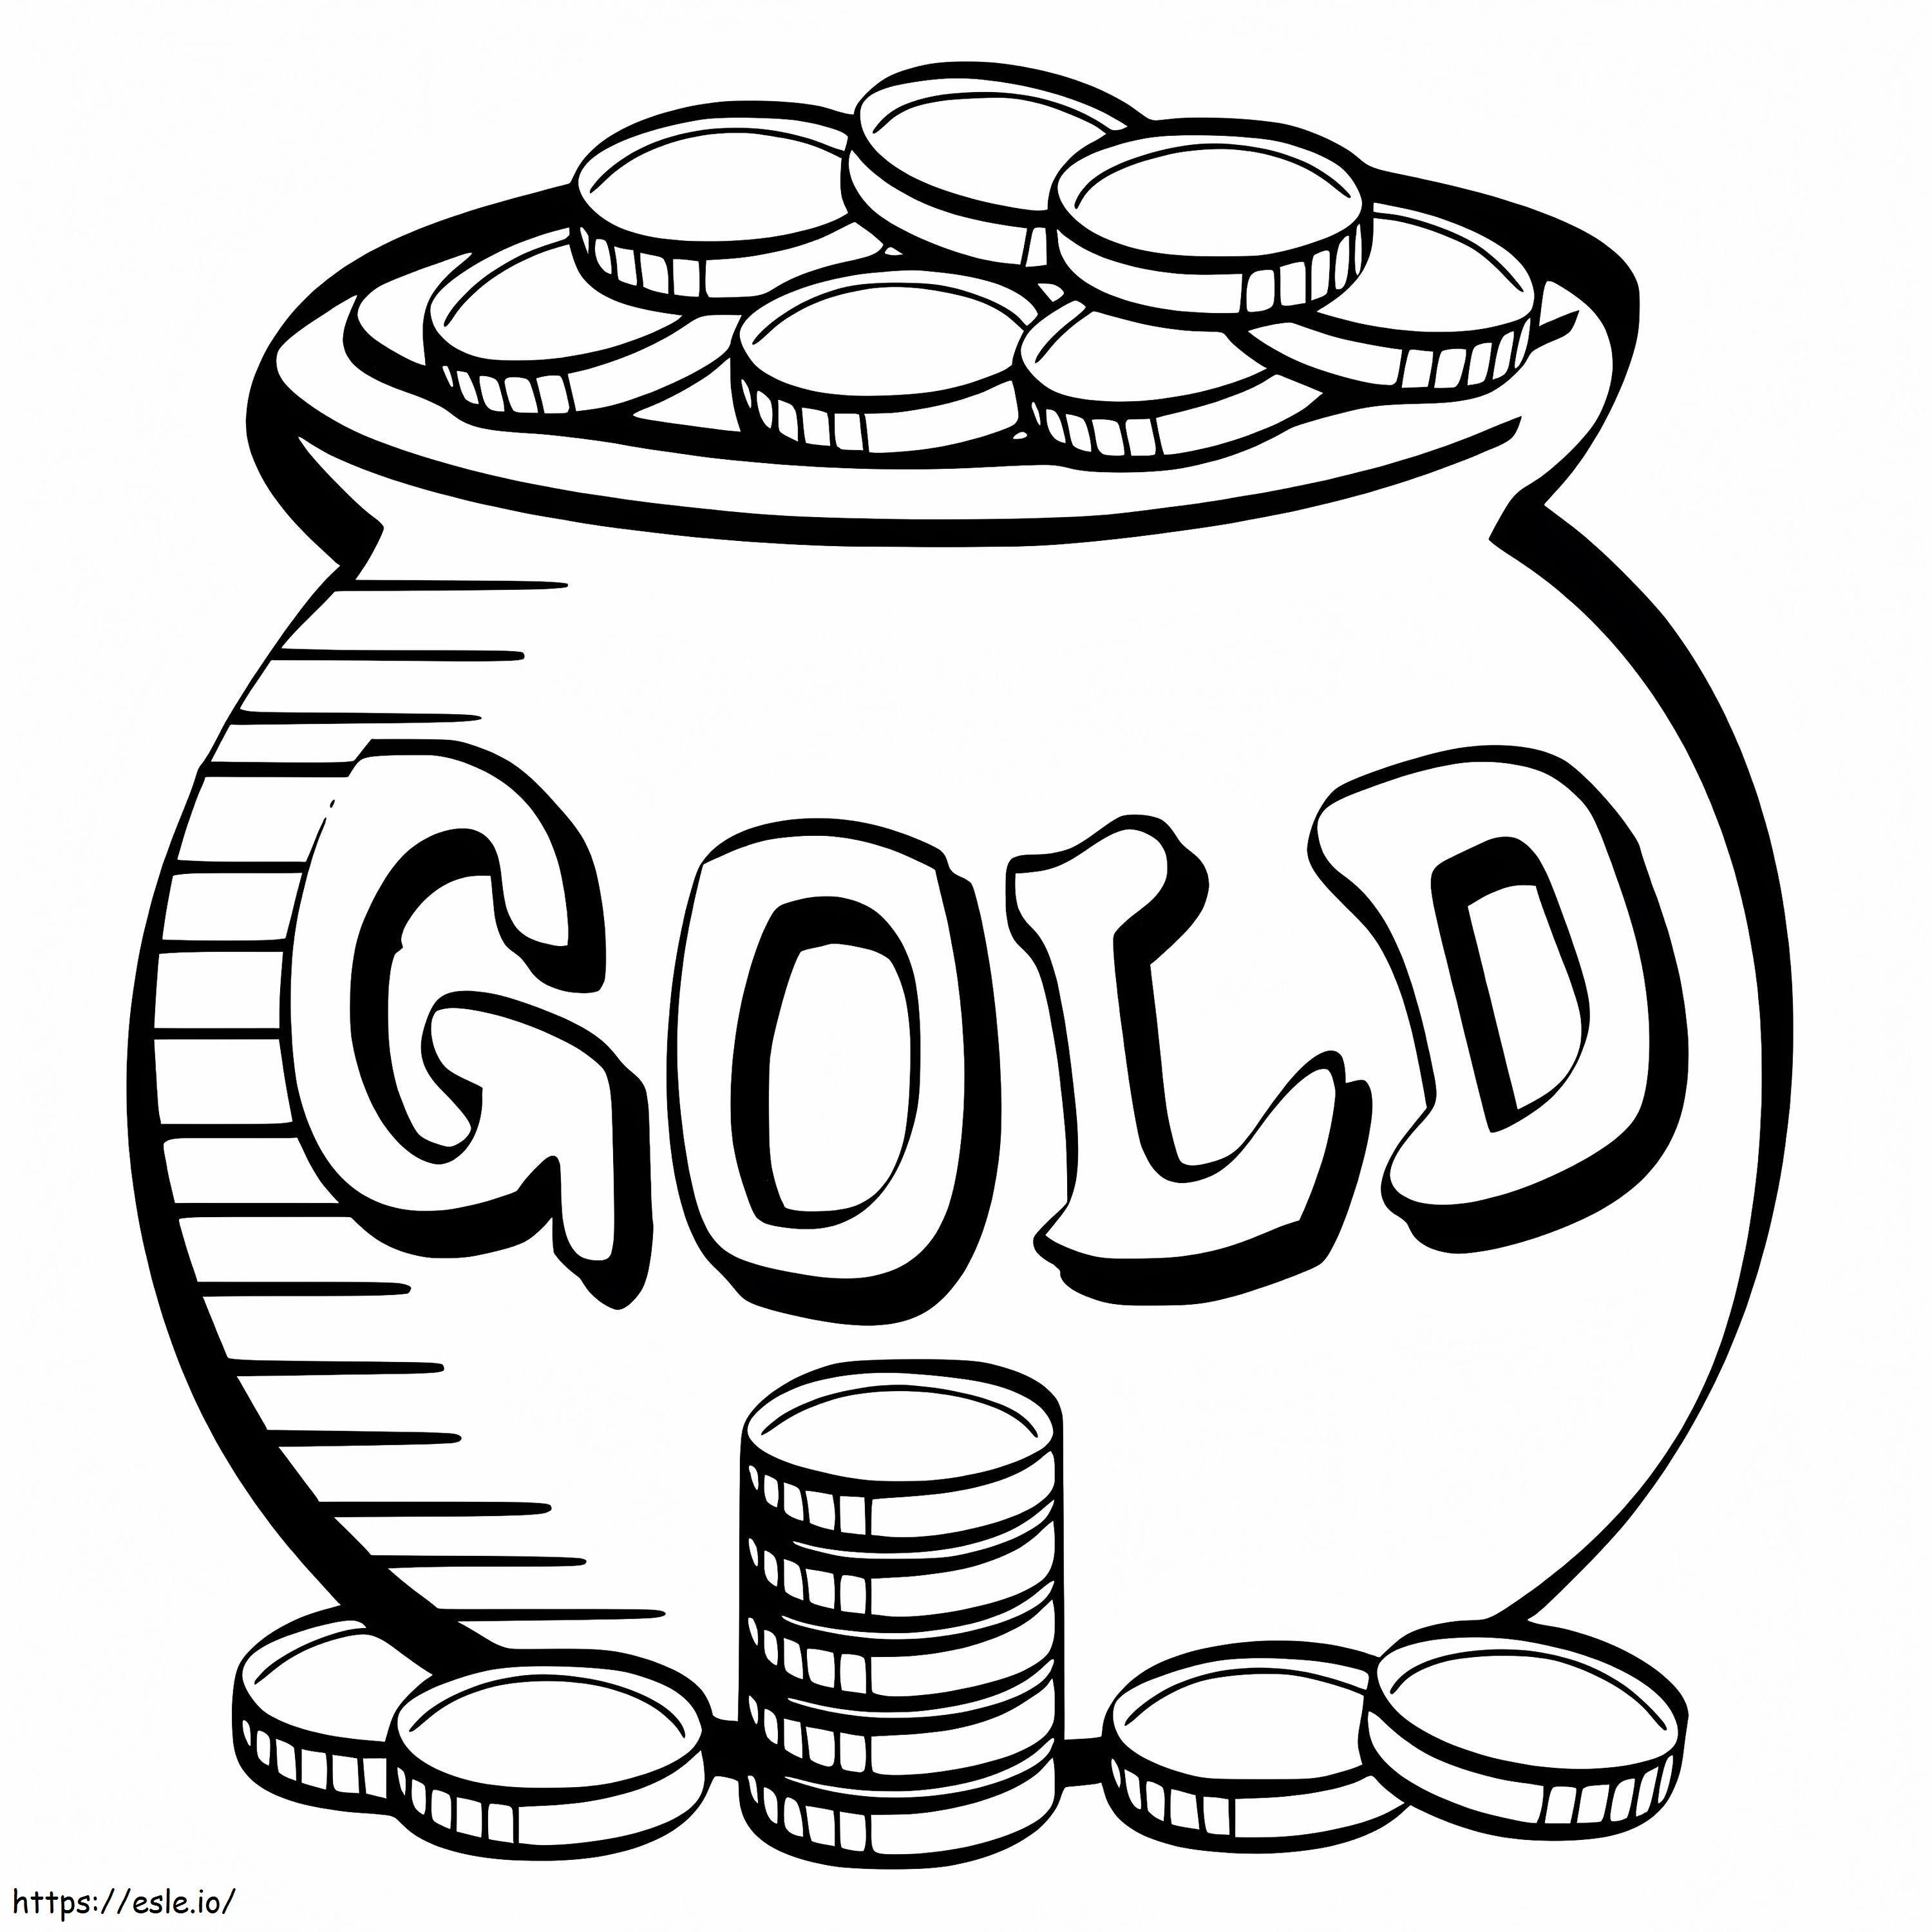 Pot Of Gold 18 coloring page